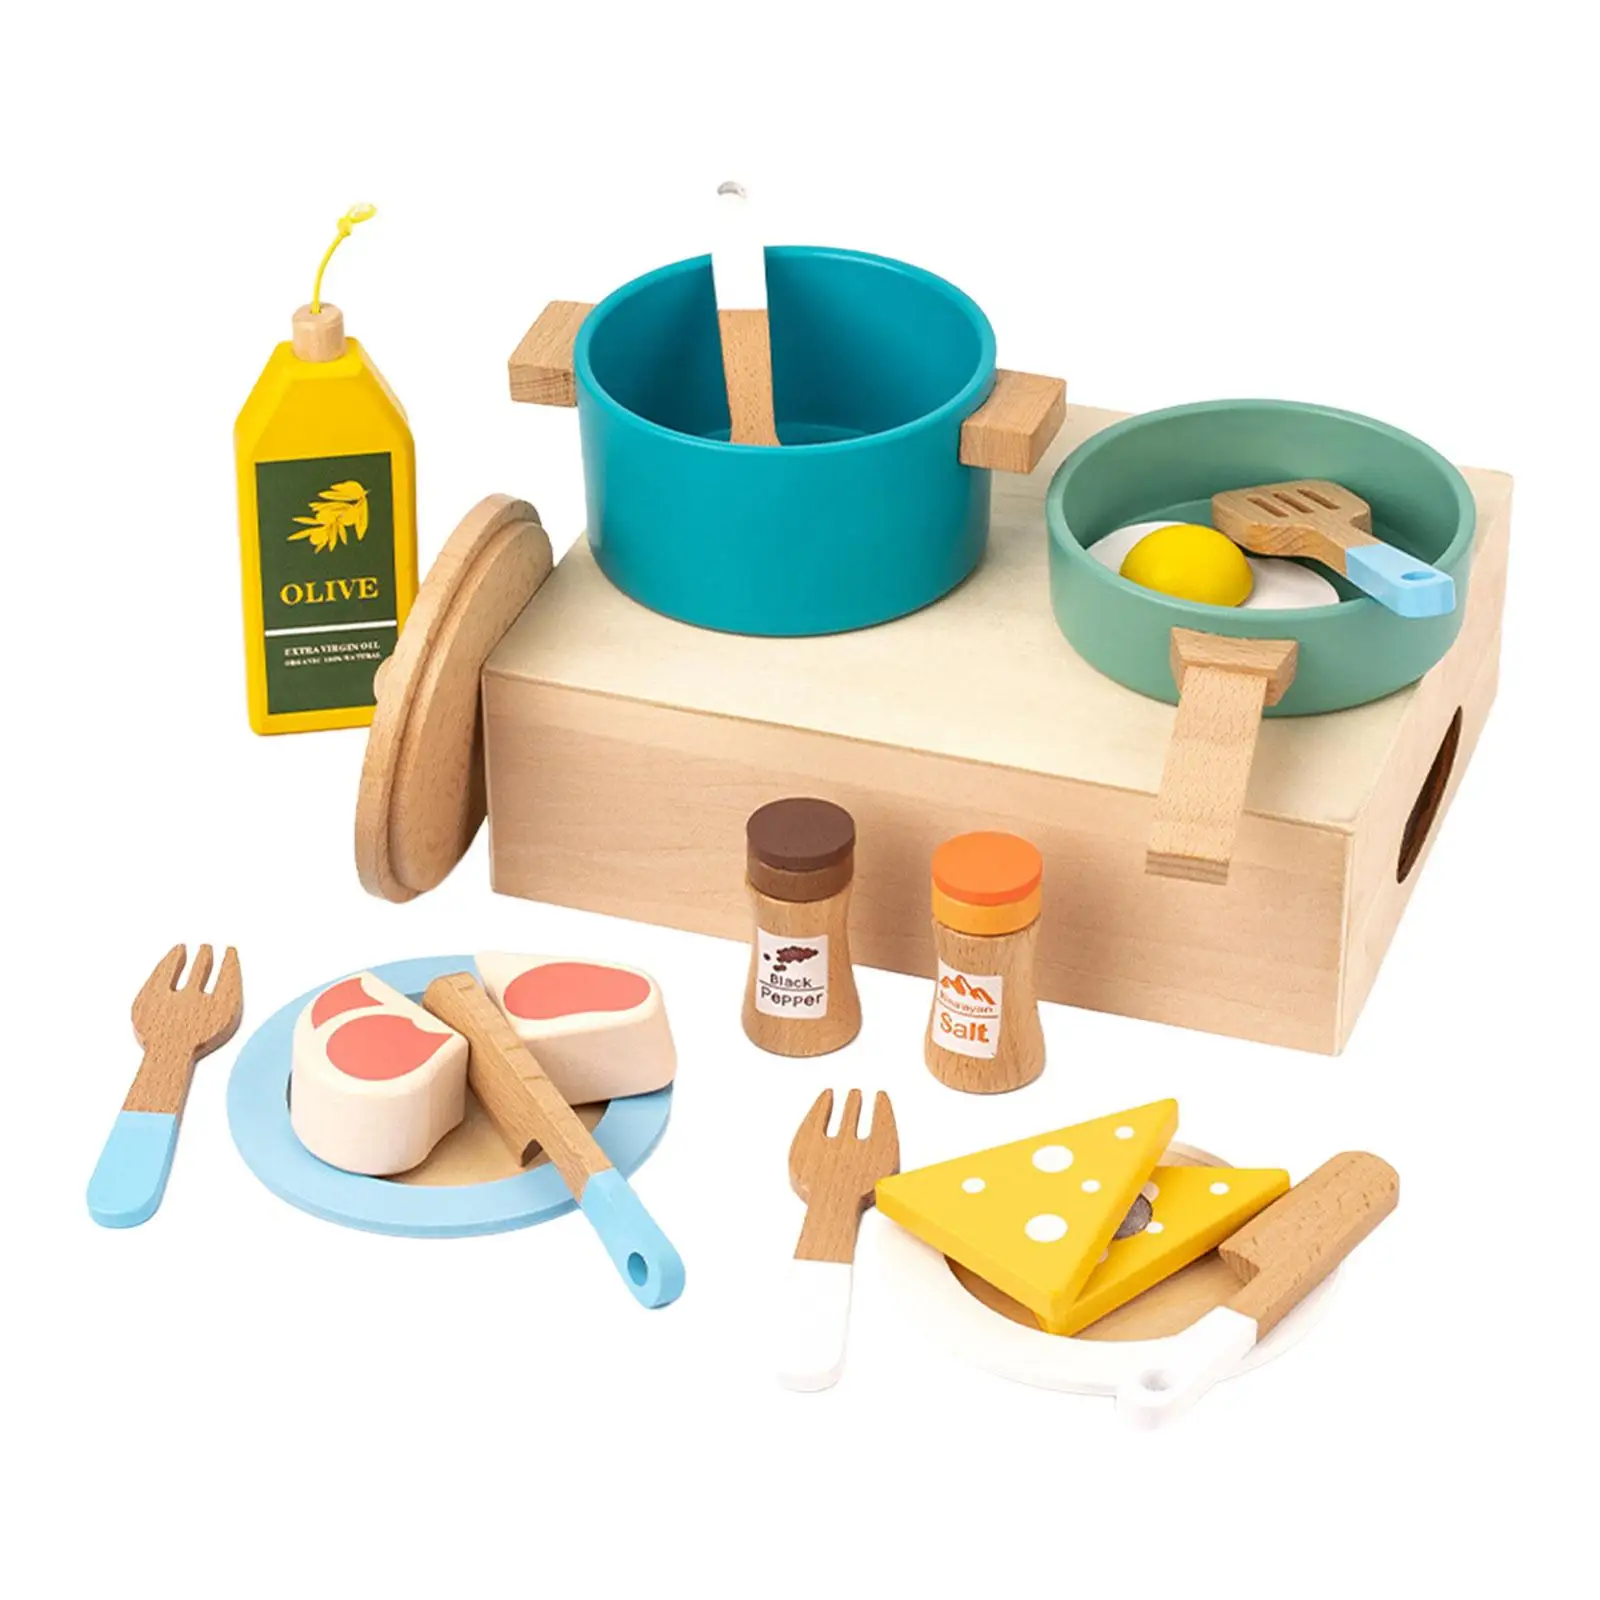 Kids Pretend Play Role Play Montessori Toddlers Cooking Playset for Handcraft Landscape Decorations Party Favors Birthday Gift